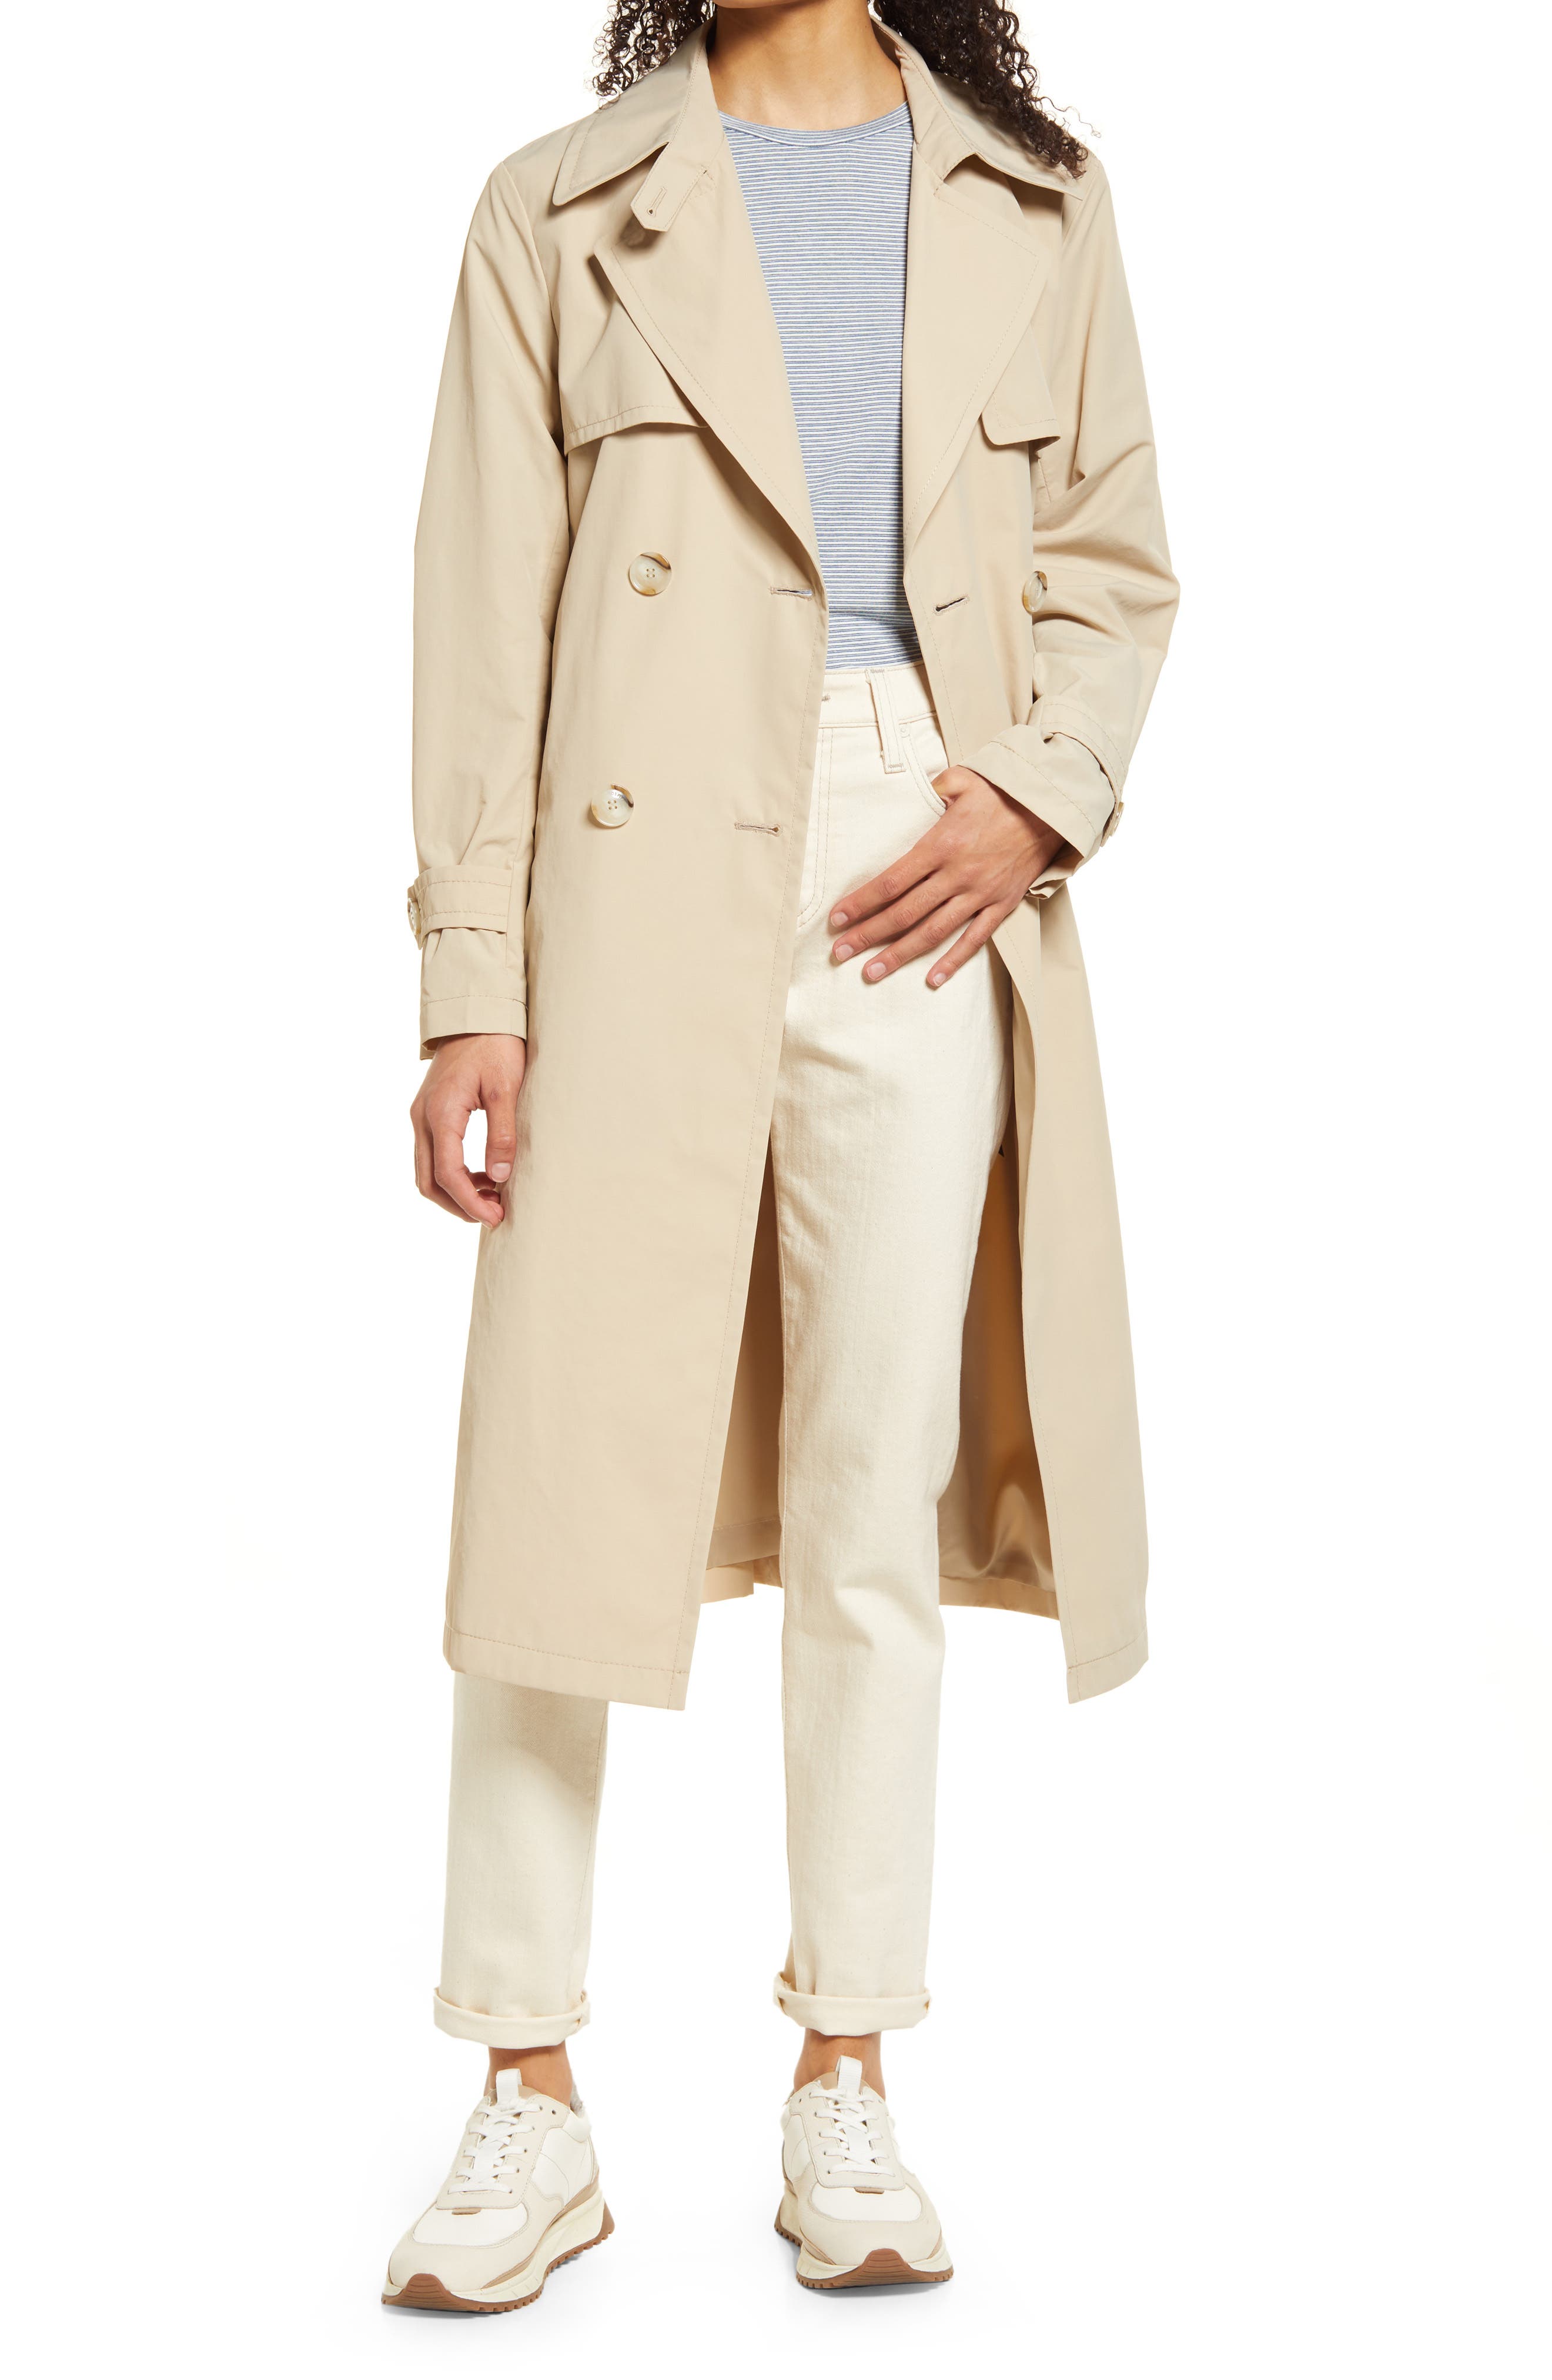 VICKY SMITH LONDON New Ladies Belted MAC Trench Coat Lined 35 Length